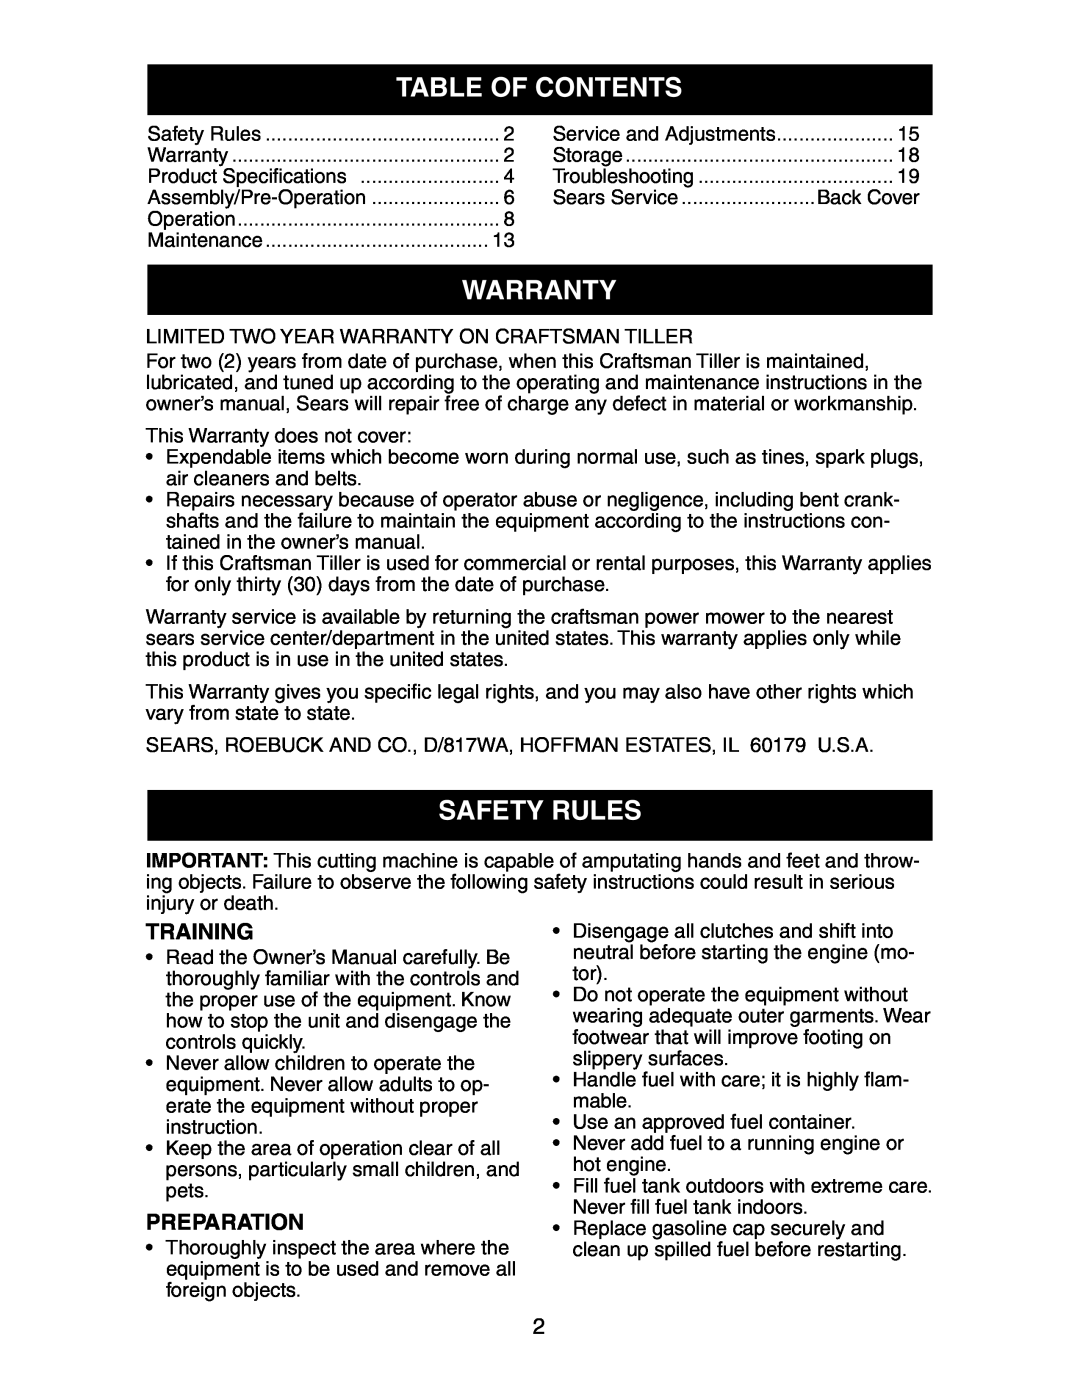 Sears 917.29425 owner manual Table Of Contents, Warranty, Safety Rules, Training, Preparation 